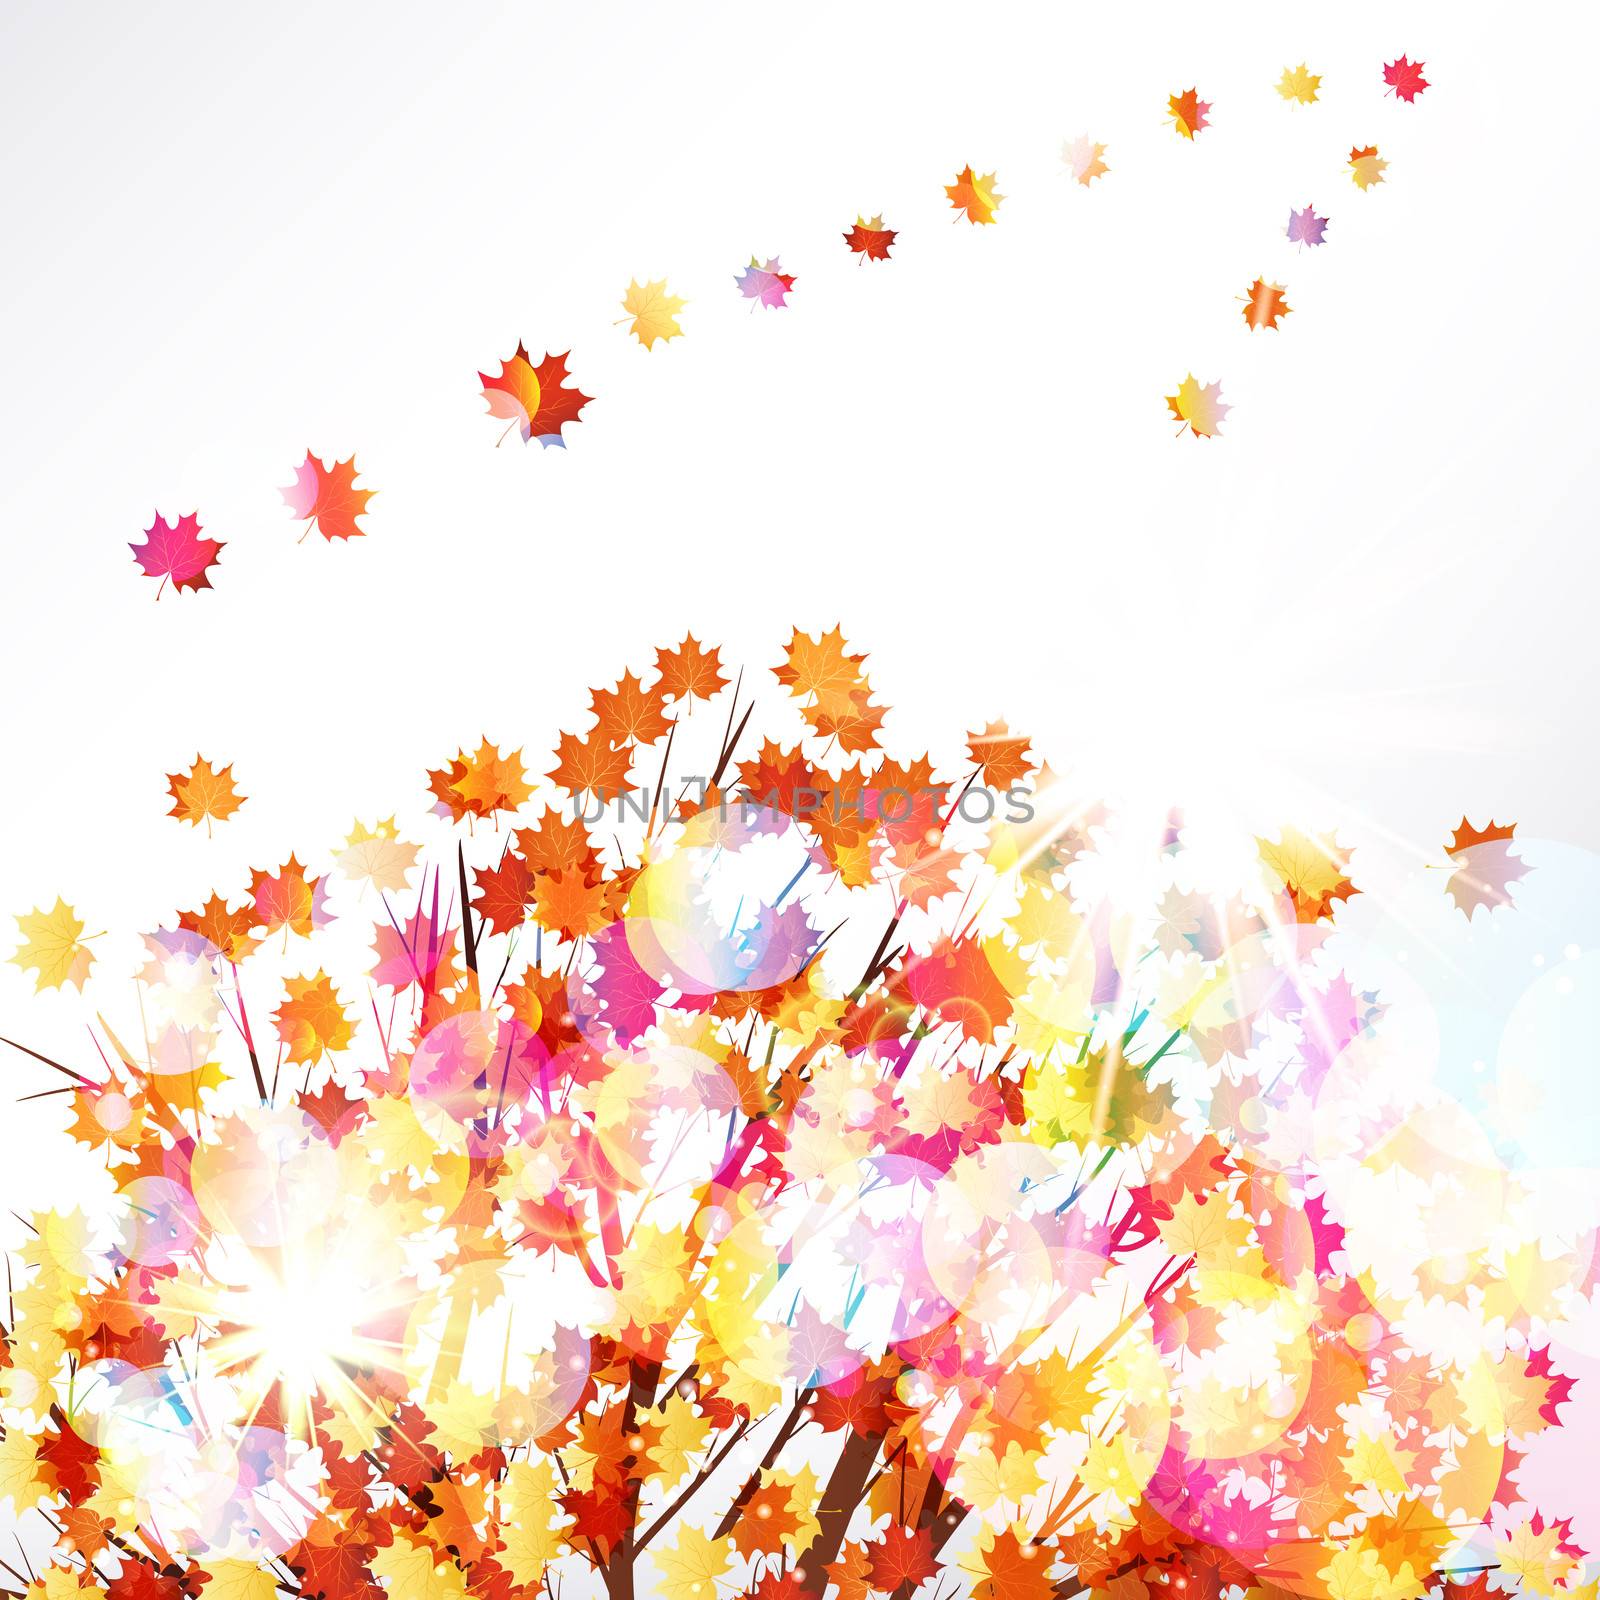 Autumn leaves design background. by Itana